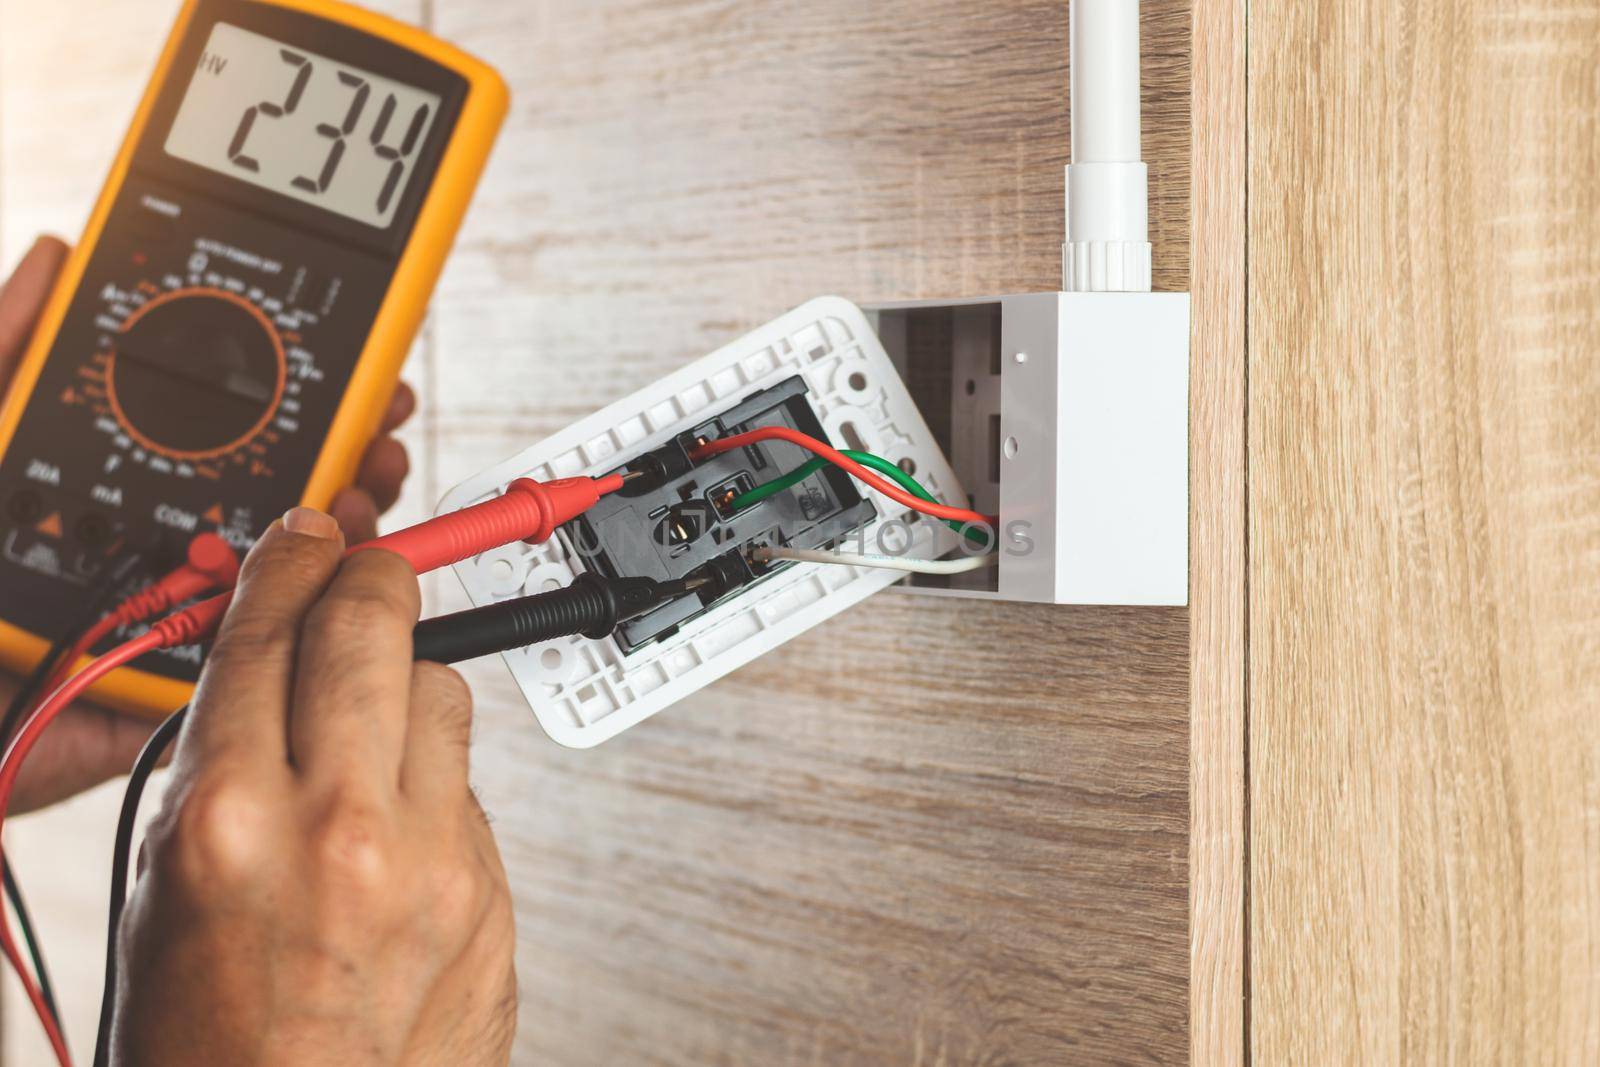 Remove the power electric plug socket from the outlet box on the wooden wall to measure the voltage with a digital meter. by wattanaphob